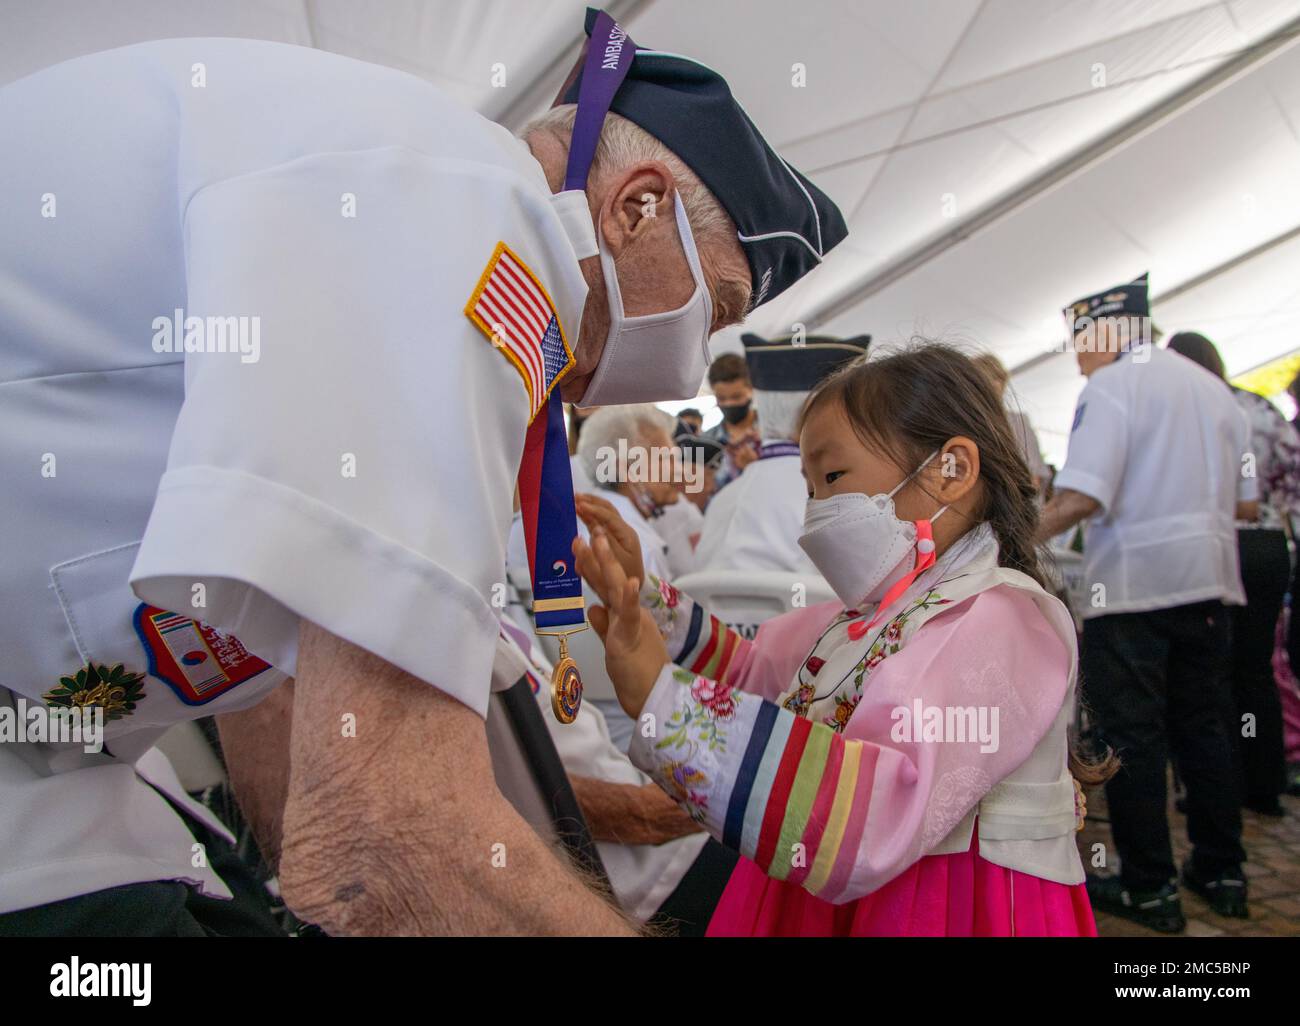 A child from the Korean community presents a medal to a Veteran with the Korean War Veterans Association during the 72nd Korean War Anniversary at the National Memorial Cemetery of the Pacific (Punchbowl) in Honolulu, Hawaii, June 25, 2022. The Korean War began on June 25, 1950, when North Korean armed forces invaded South Korea. The attack took place at several strategic points along the 38th parallel, the line dividing the communist Democratic People’s Republic of Korea from the Republic of Korea in the south. This event honors the lives lost and the sacrifices made during the war. Stock Photo